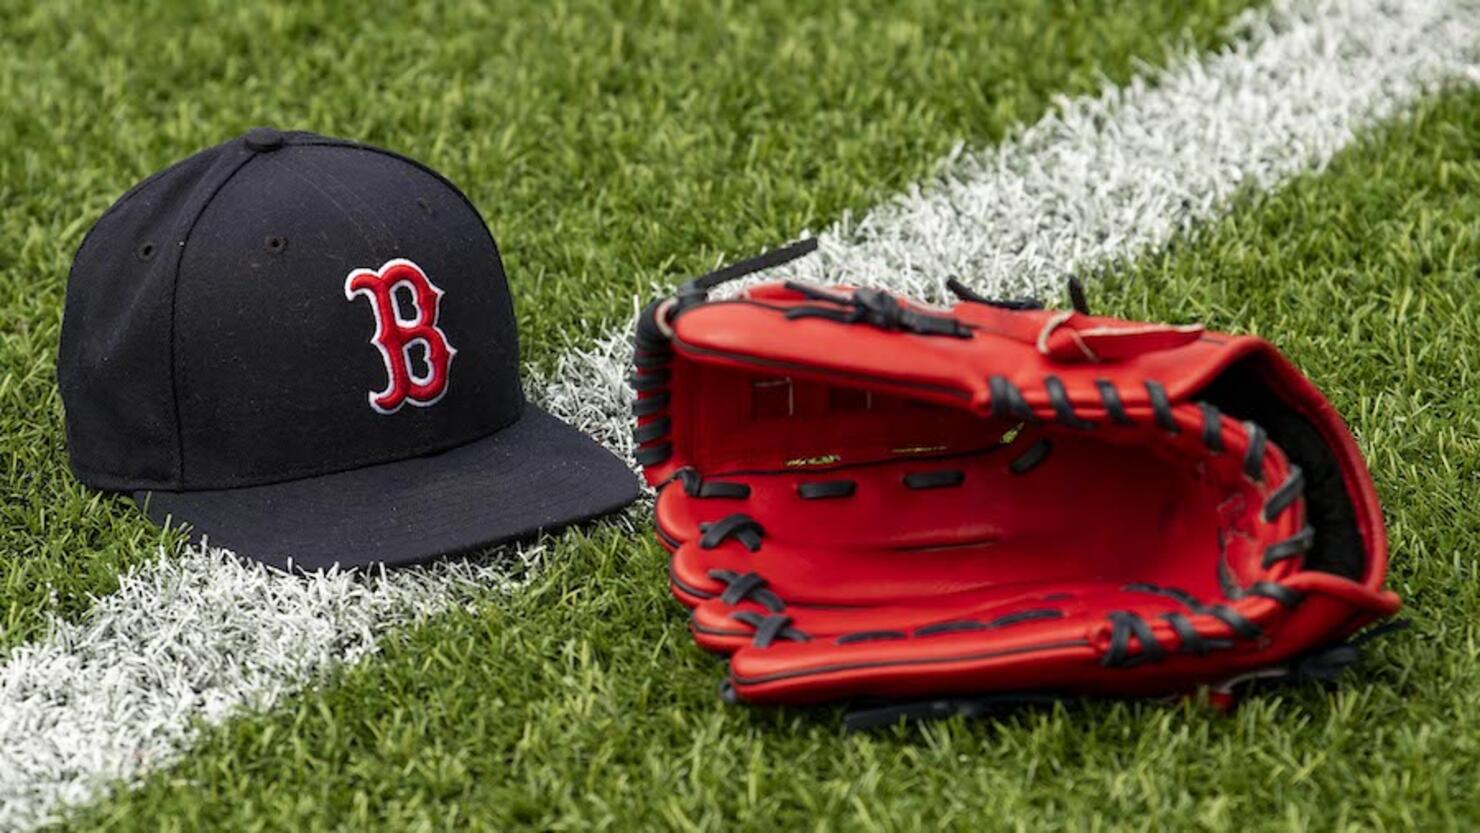 PHOTO: Red Sox Unveil 'Patriots' Day' Uniforms Honoring City Of Boston